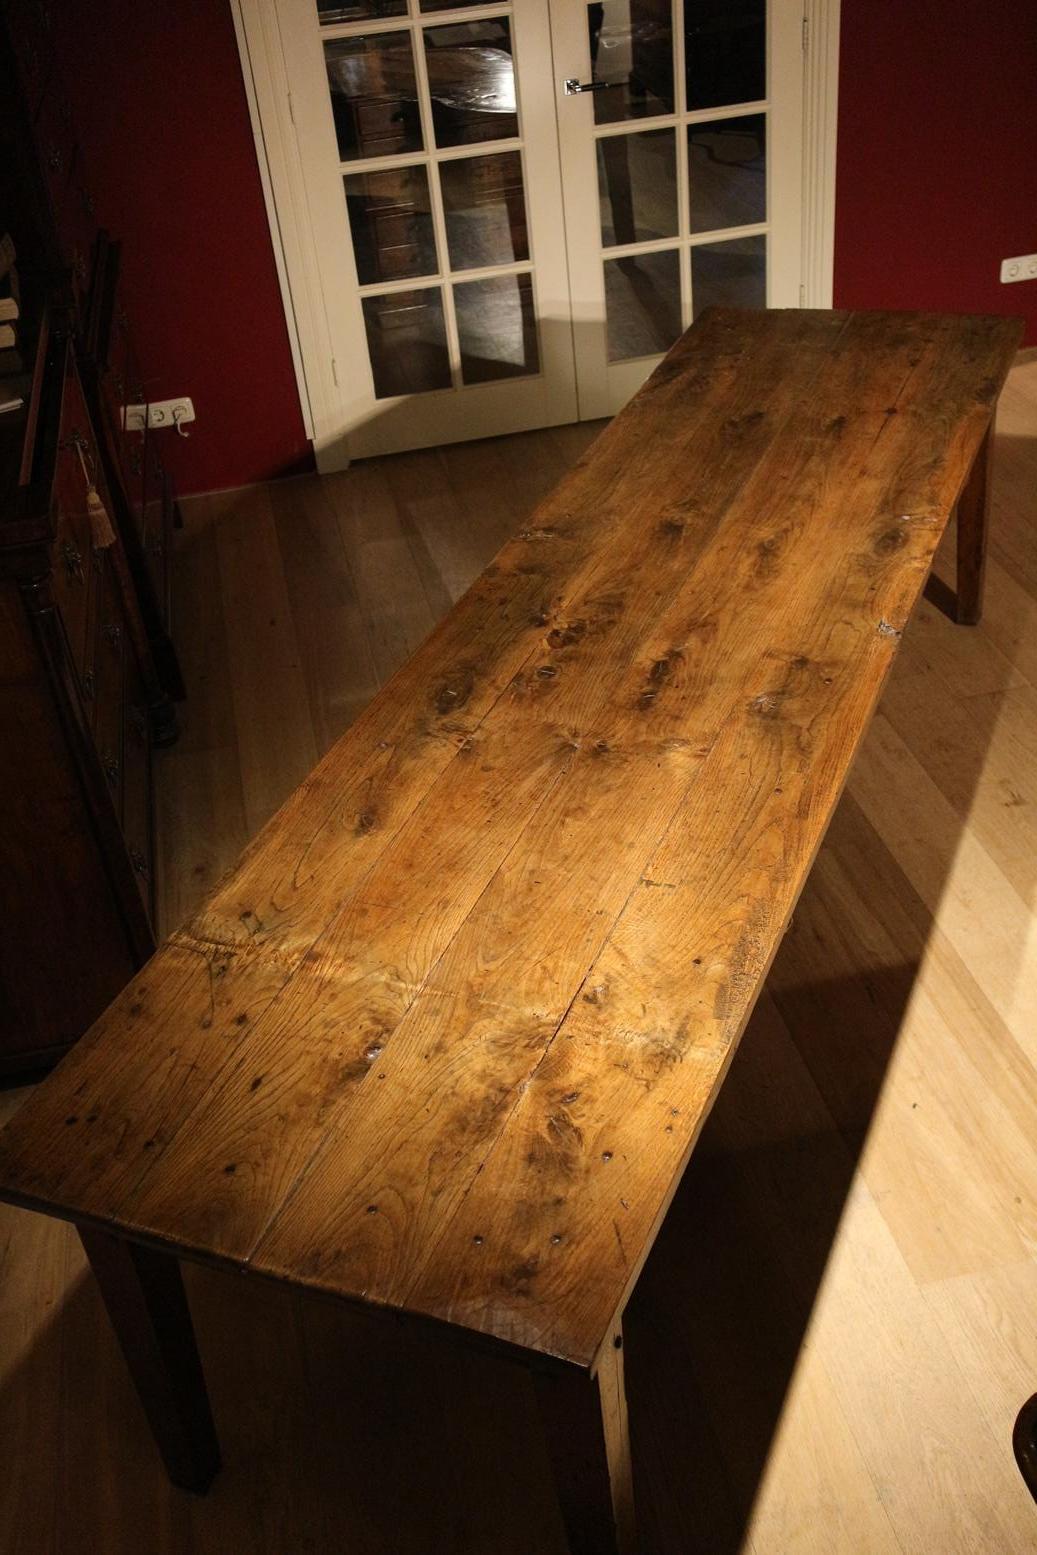 Impressive French oak table in the length of 295cm! The table is beautifully aged and very solid. Table has 2 drawers. An original 19th century French table in this size is unique. The legroom has been increased to 63cm without raising the table.